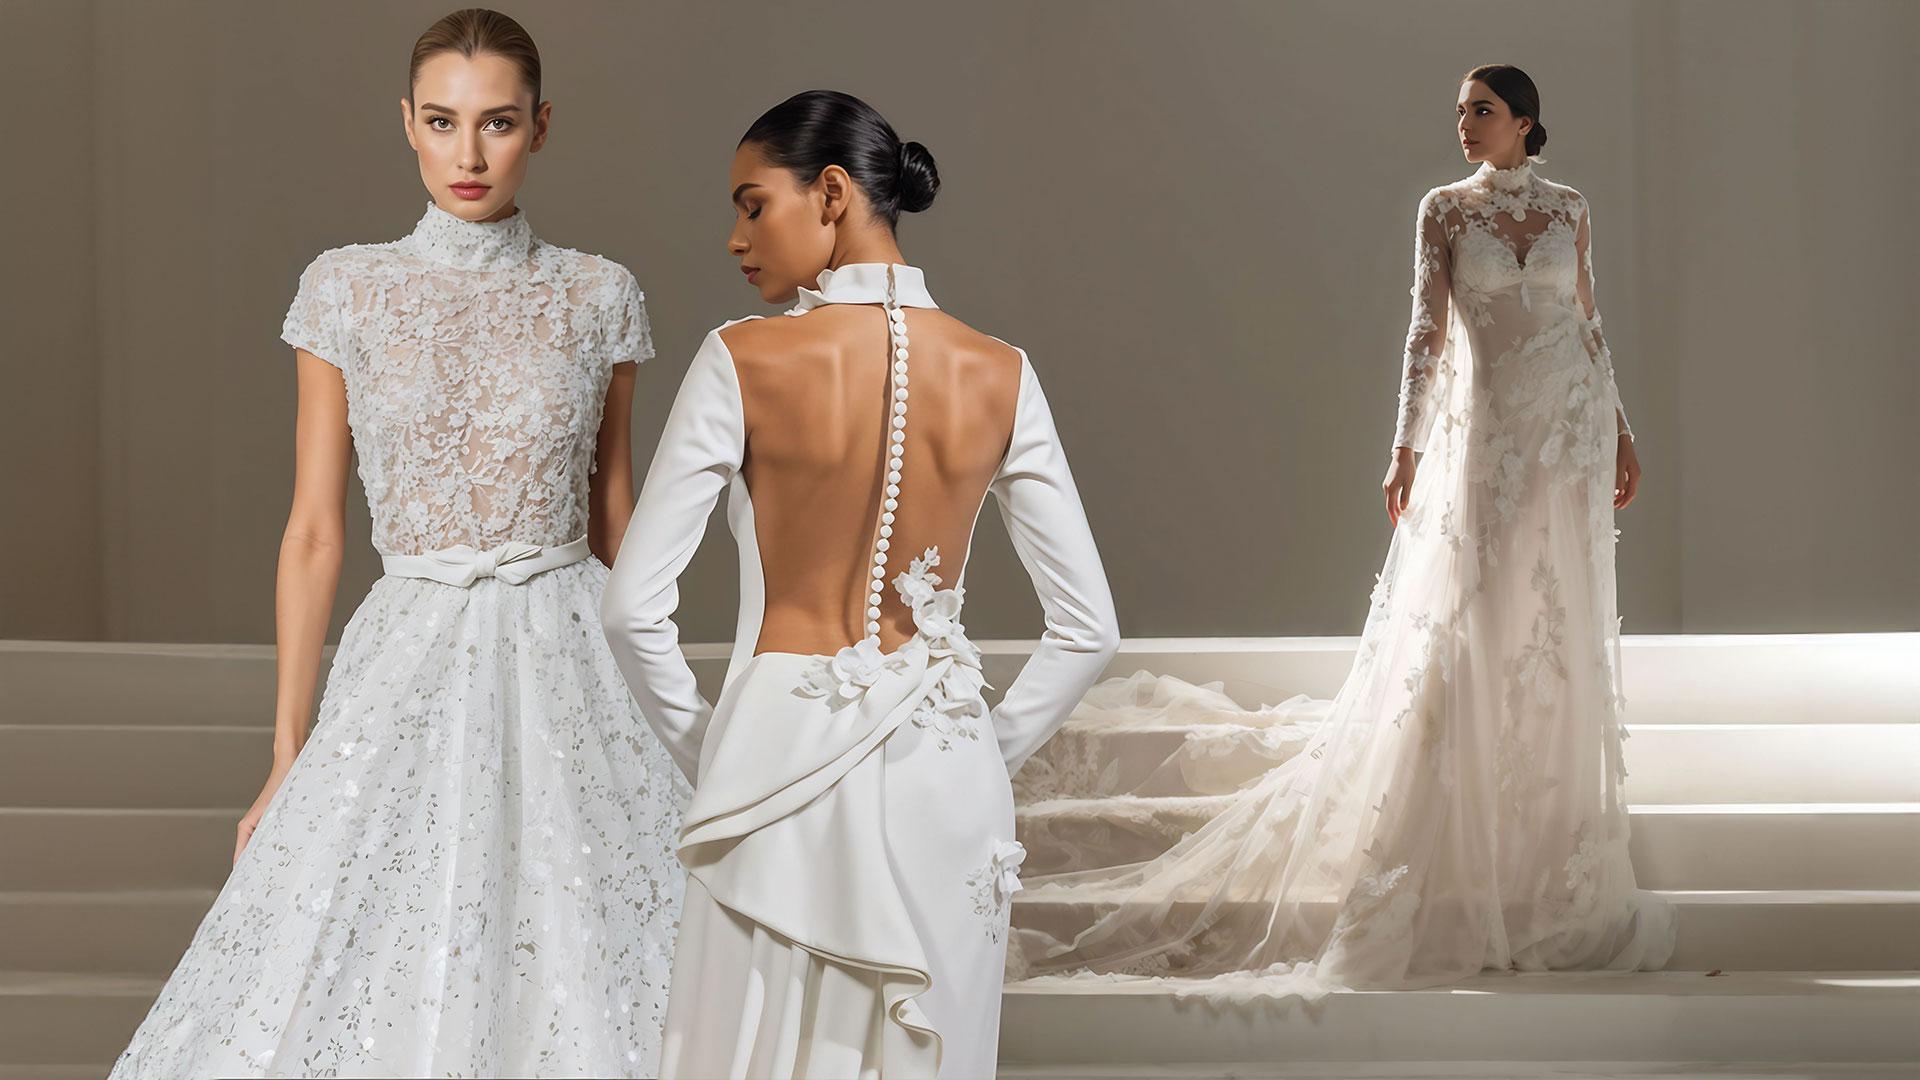 Bride & Glory: June brides tie the knot in timeless sophistication